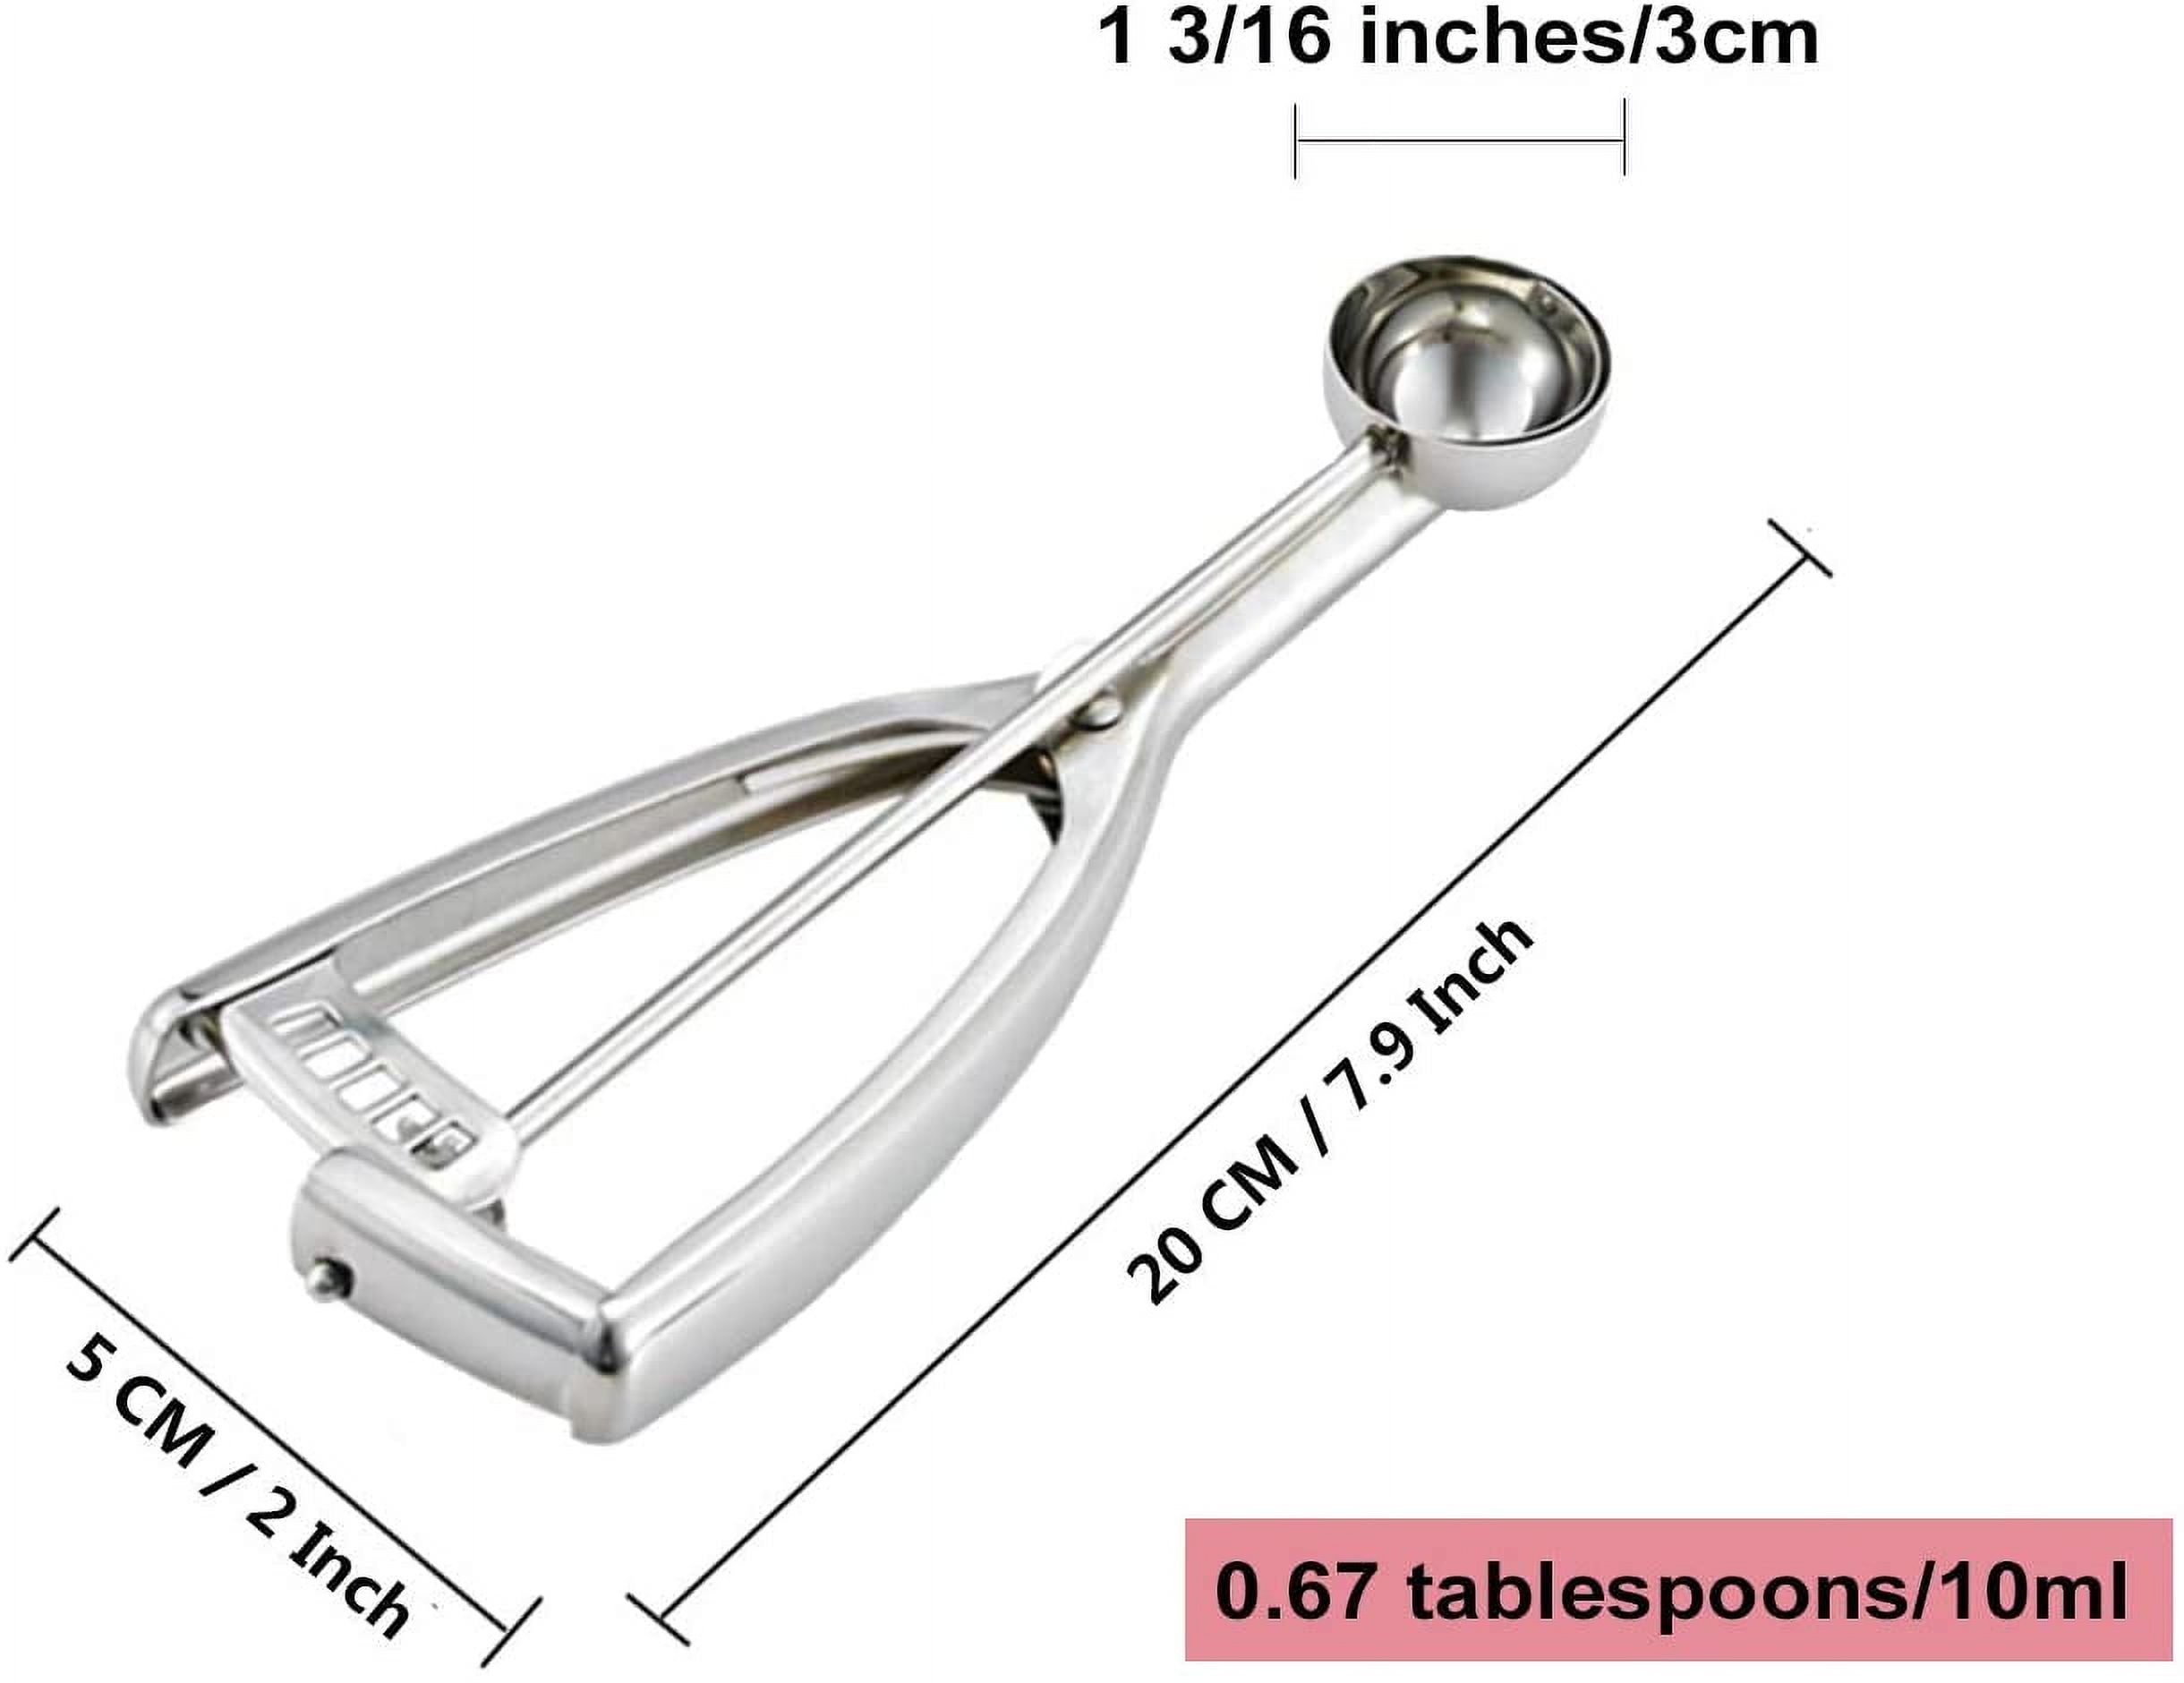  Fayomir Mini Cookie Scoop, Cookie dough Scoop, Melon Baller  Scoop, 2 Teaspoon/ 10ml/ 0.33 OZ, Selected 18/8 Stainless Steel, for Making  Cookie, Melon Ball, Ice Cream: Home & Kitchen